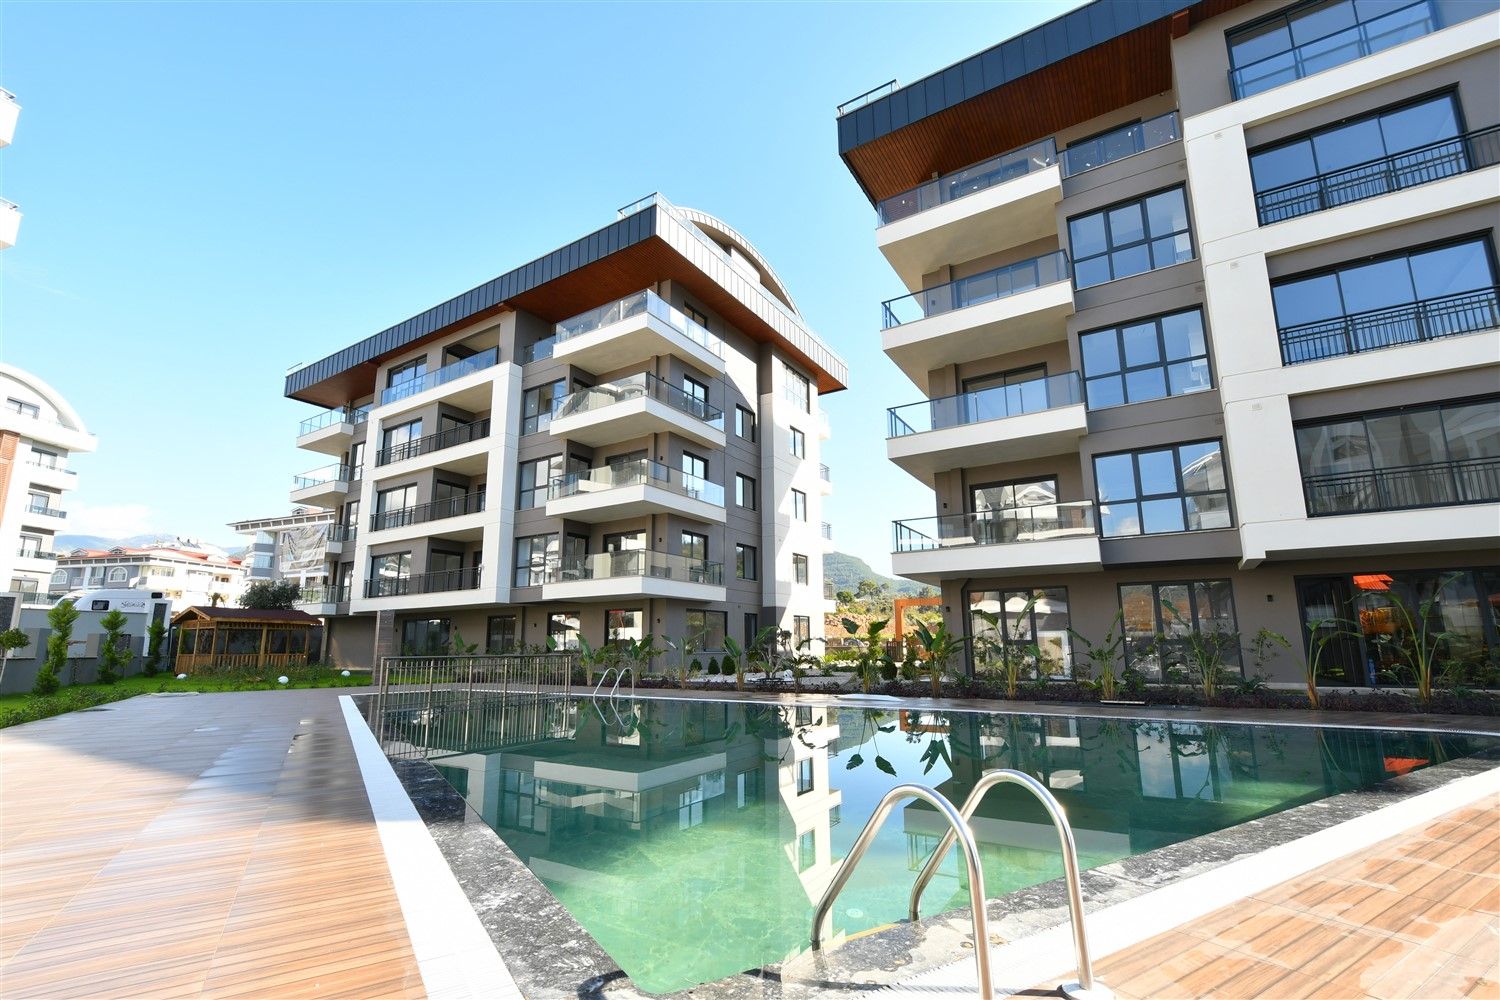 New 3+1 apartment with separate kitchen - Oba district, Alanya